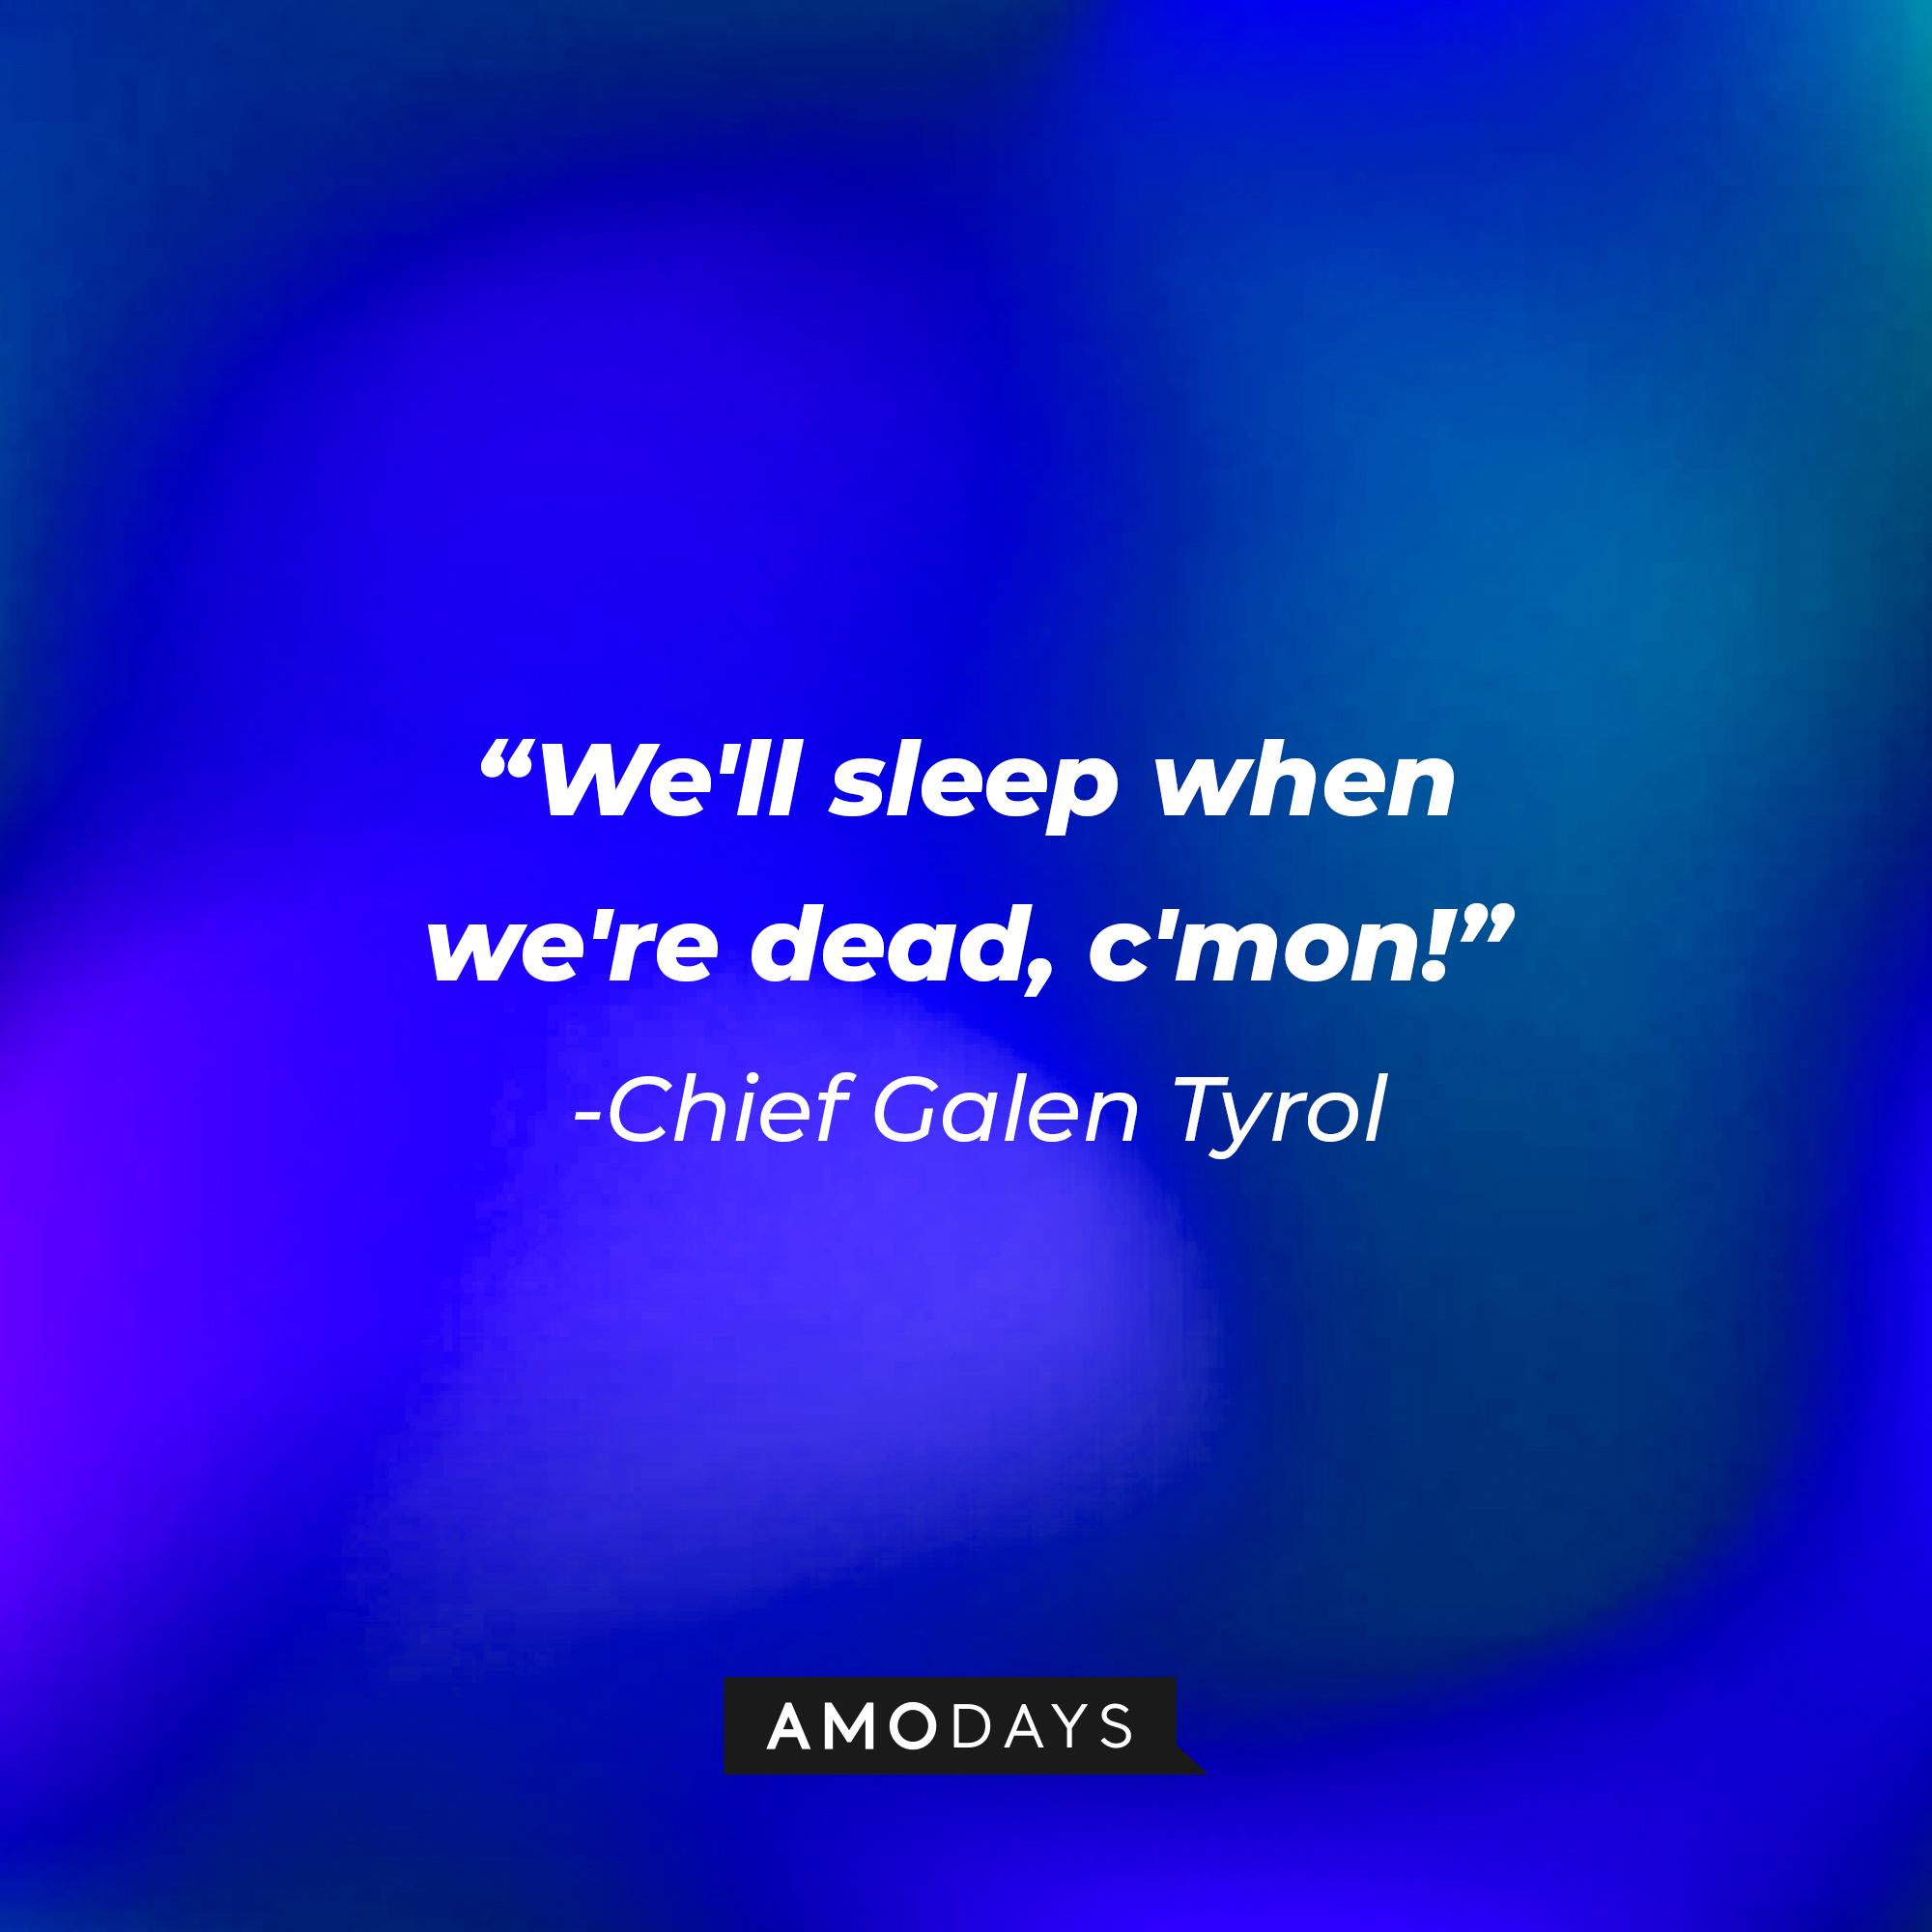 Chief Galen Tyrol’s quote: “We'll sleep when we're dead, c'mon!” | Source: AmoDays